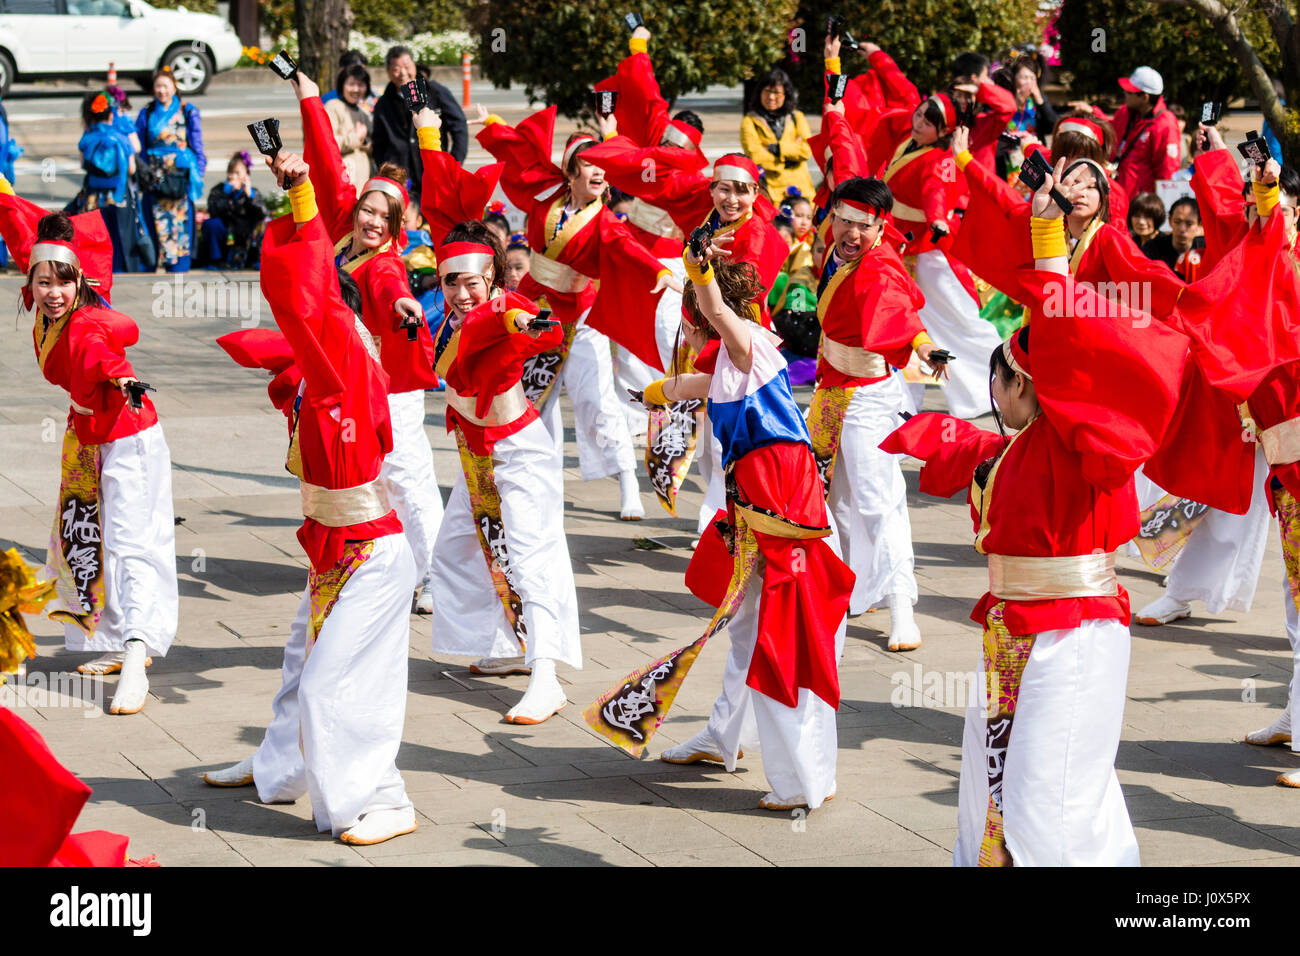 Hinokuni Yosakoi Dance festival in Kumamoto. Team formation dancing in red yukata jackets with white trousers, holding naruko, clappers. Side view. Stock Photo